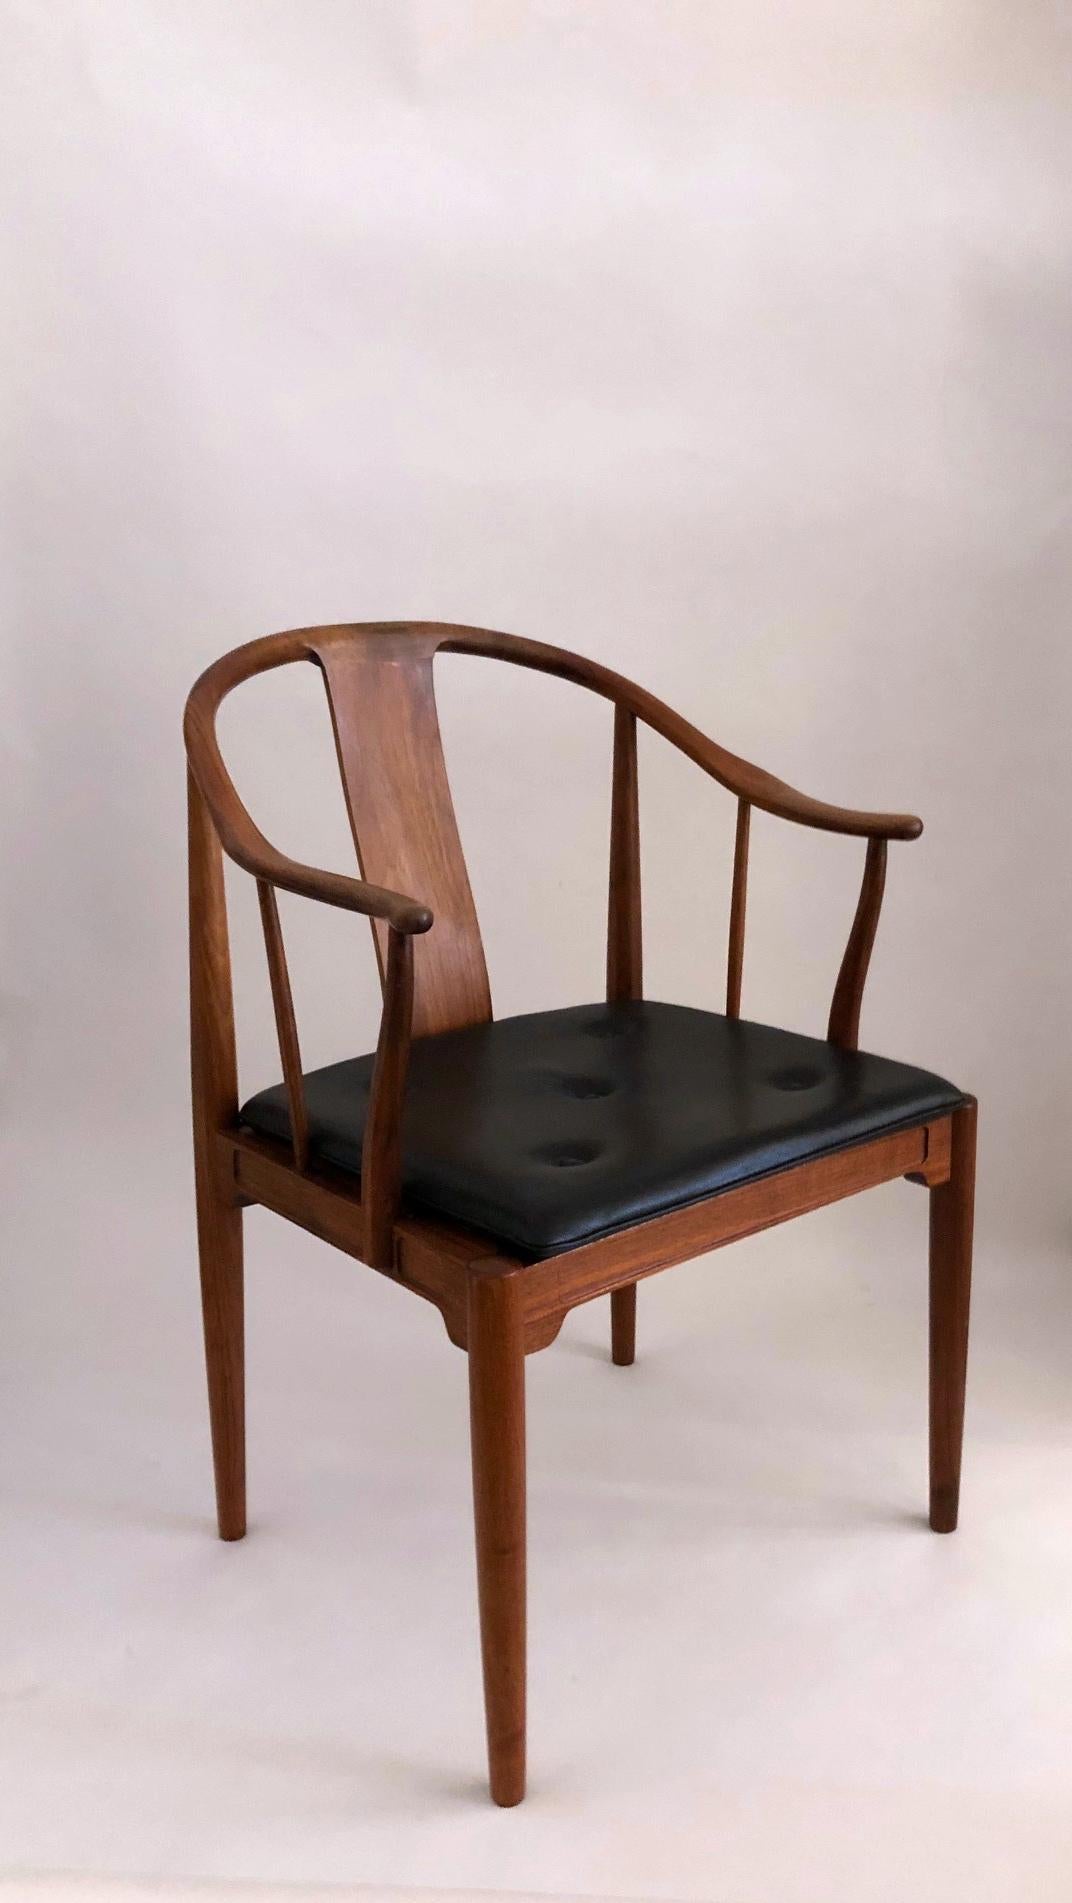 Hans J. Wegner:
 A walnut armchair “China chairs”. The China chair was designed by Hans J. Wegner in 1944.
Loose seat cushion upholstered with black leather, fitted with buttons. Model 4283. 
Manufactured 1977 by Fritz Hansen with maker's silver